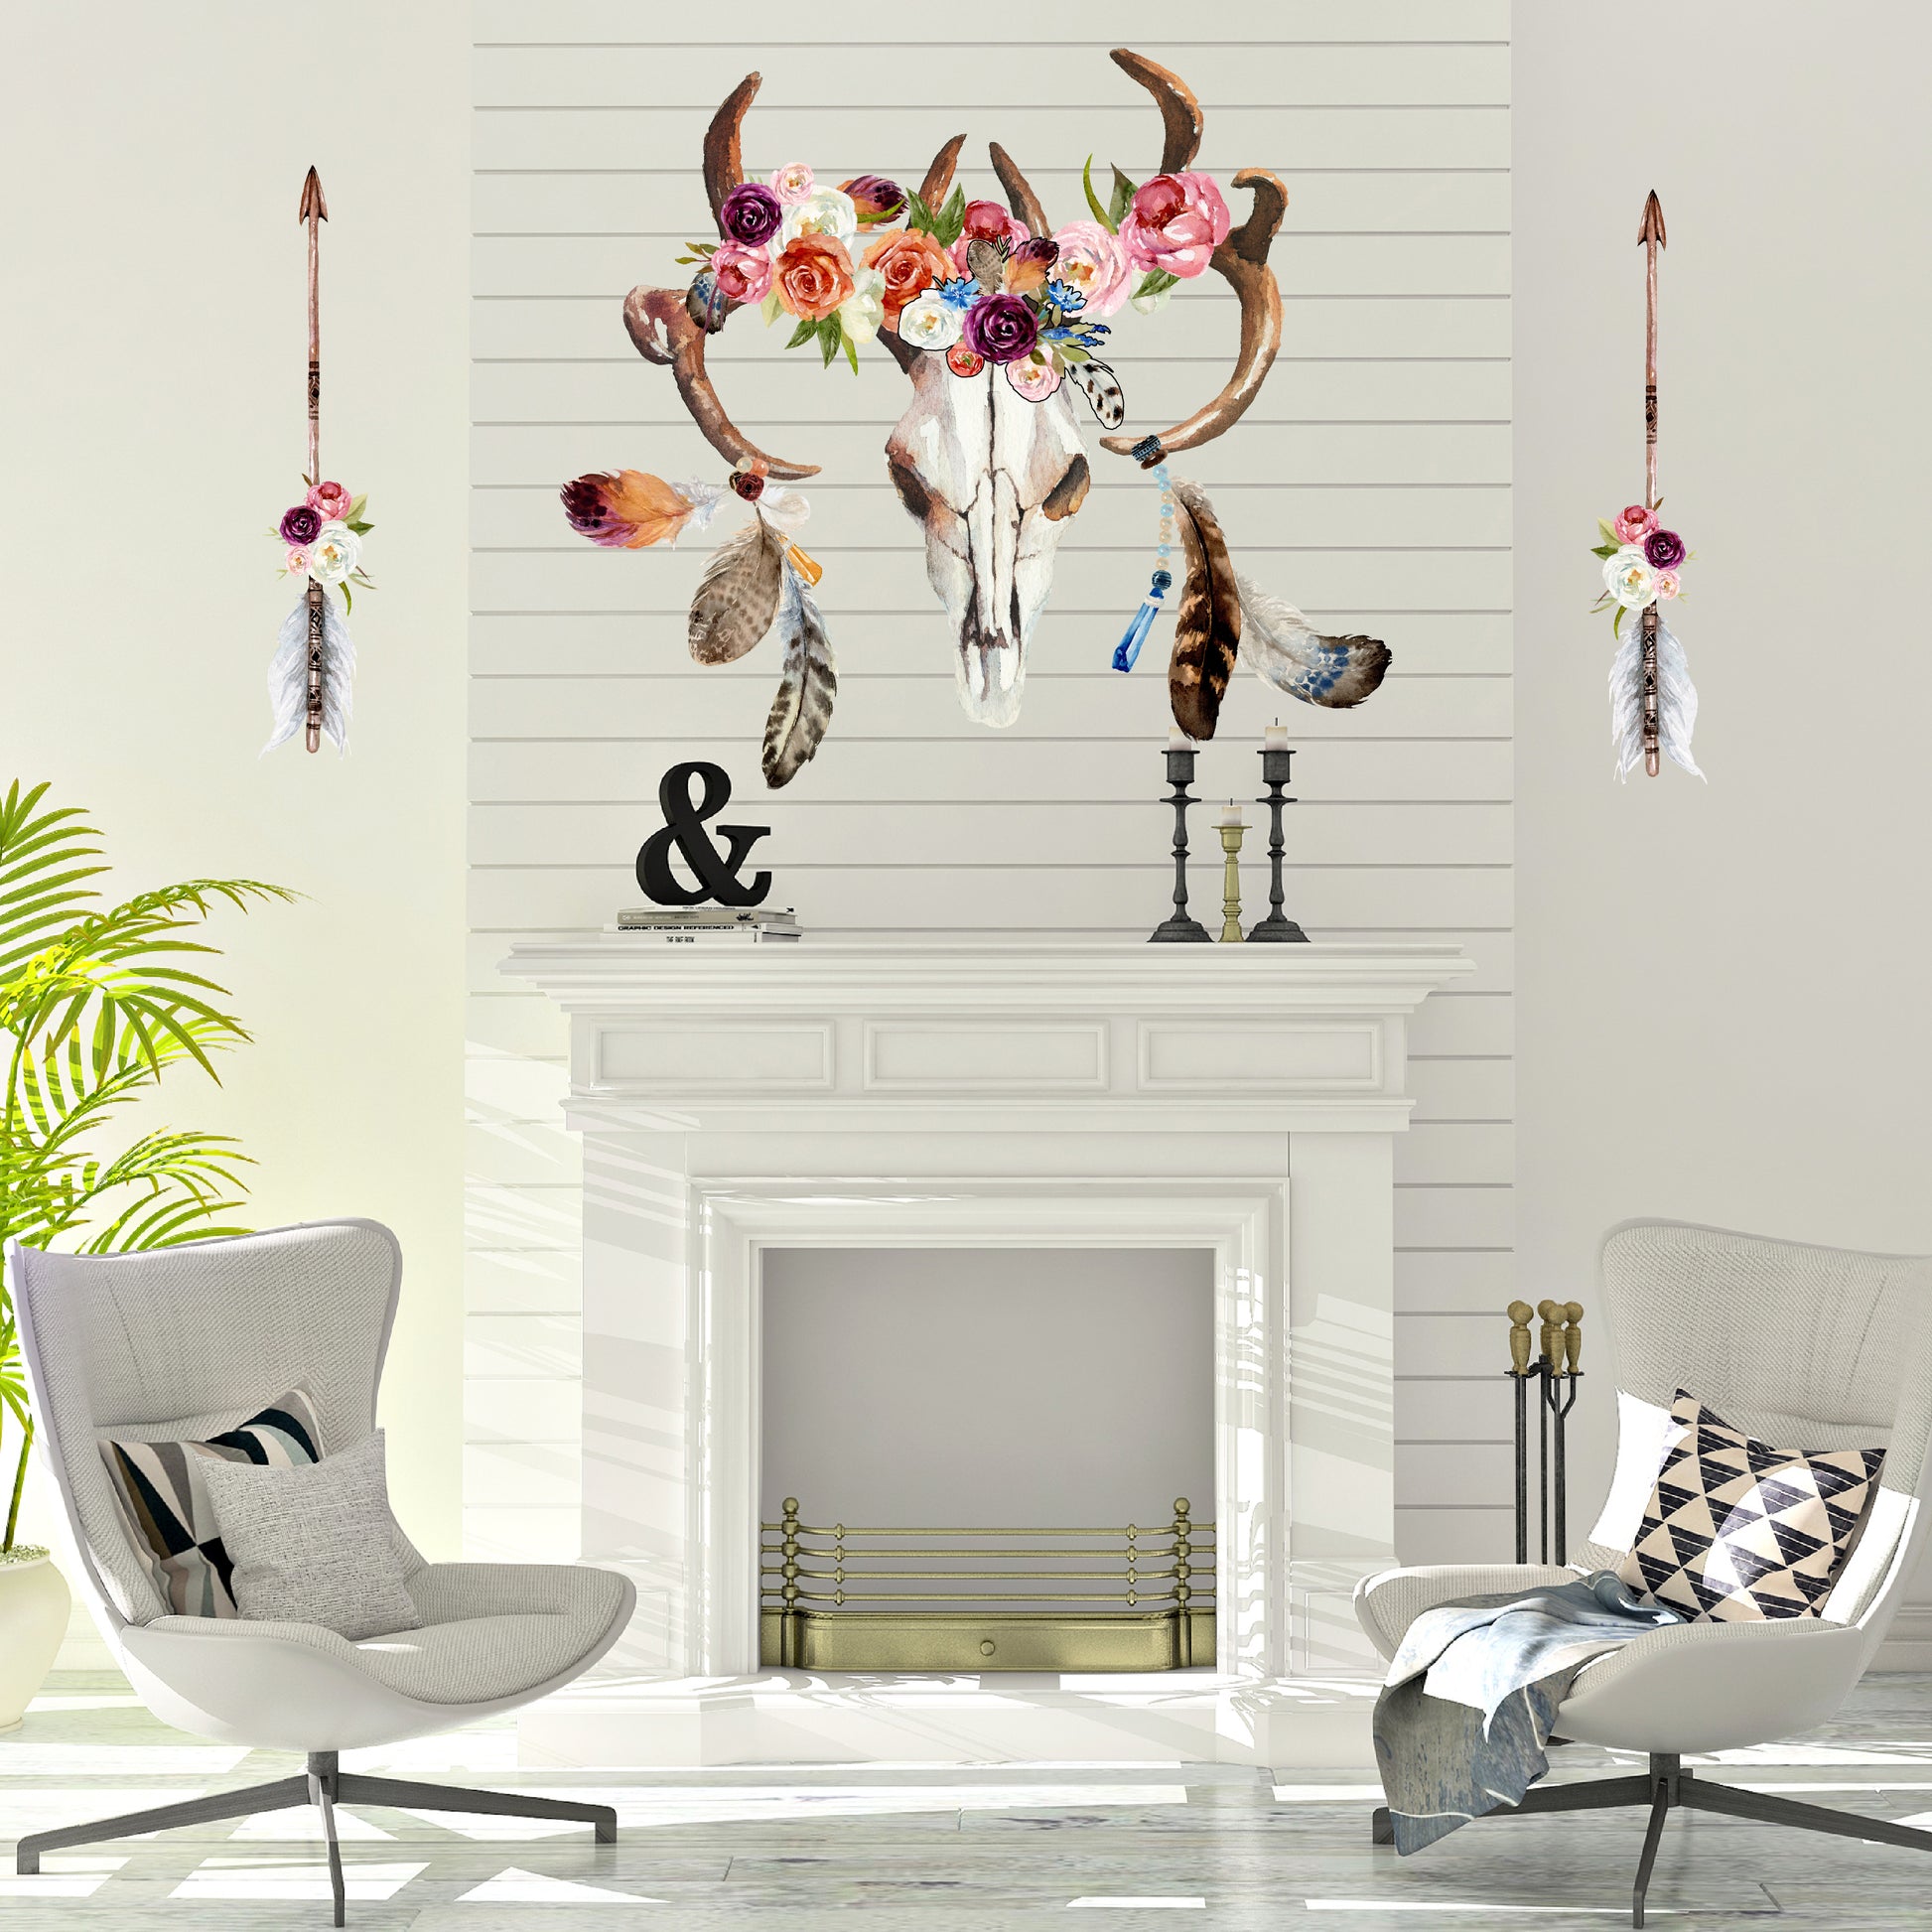 Boho Skull Feathers and Flowers Fabric Wall Decals